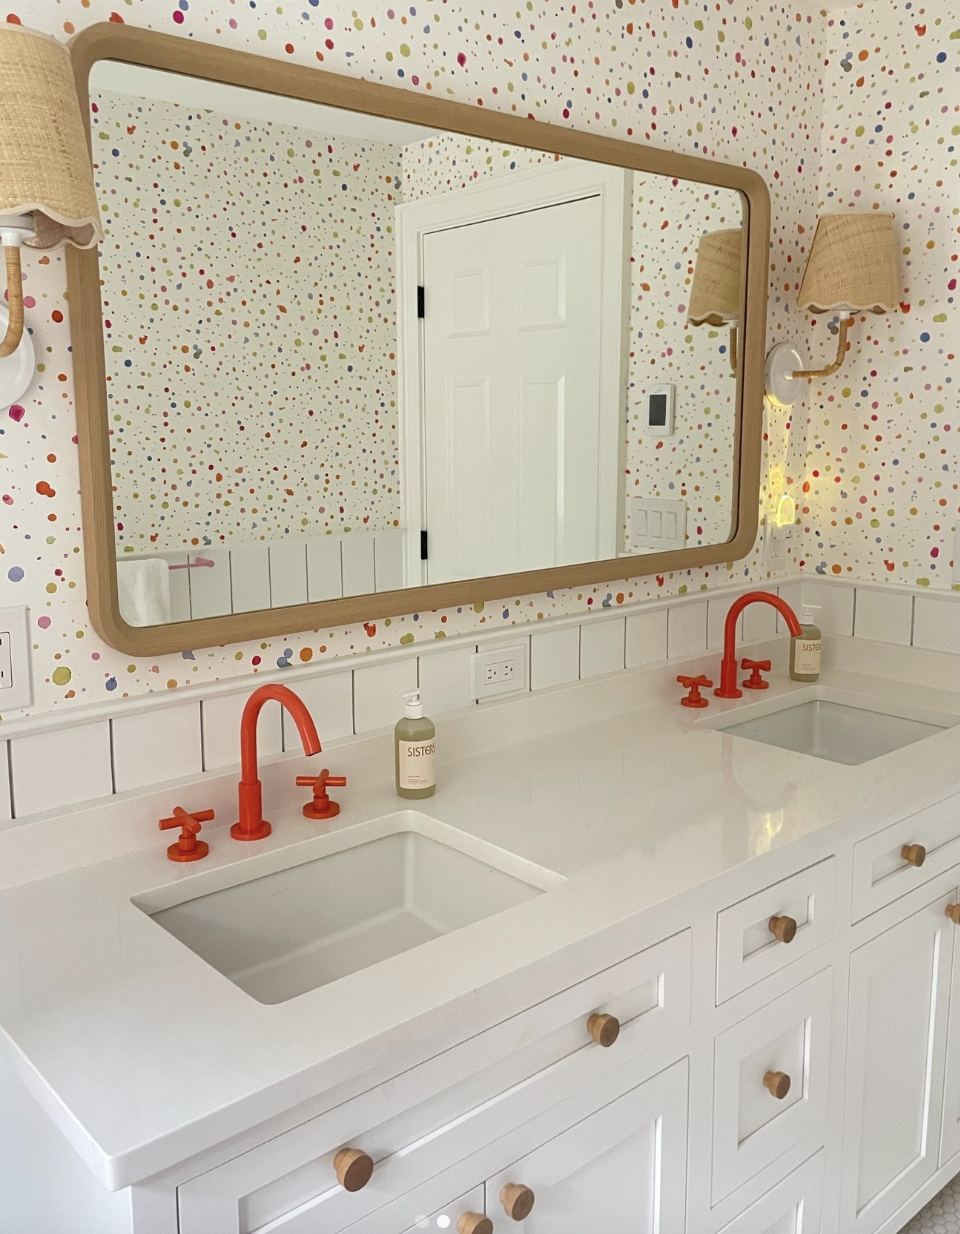 Colorful wallpaper appears in a kids' bath